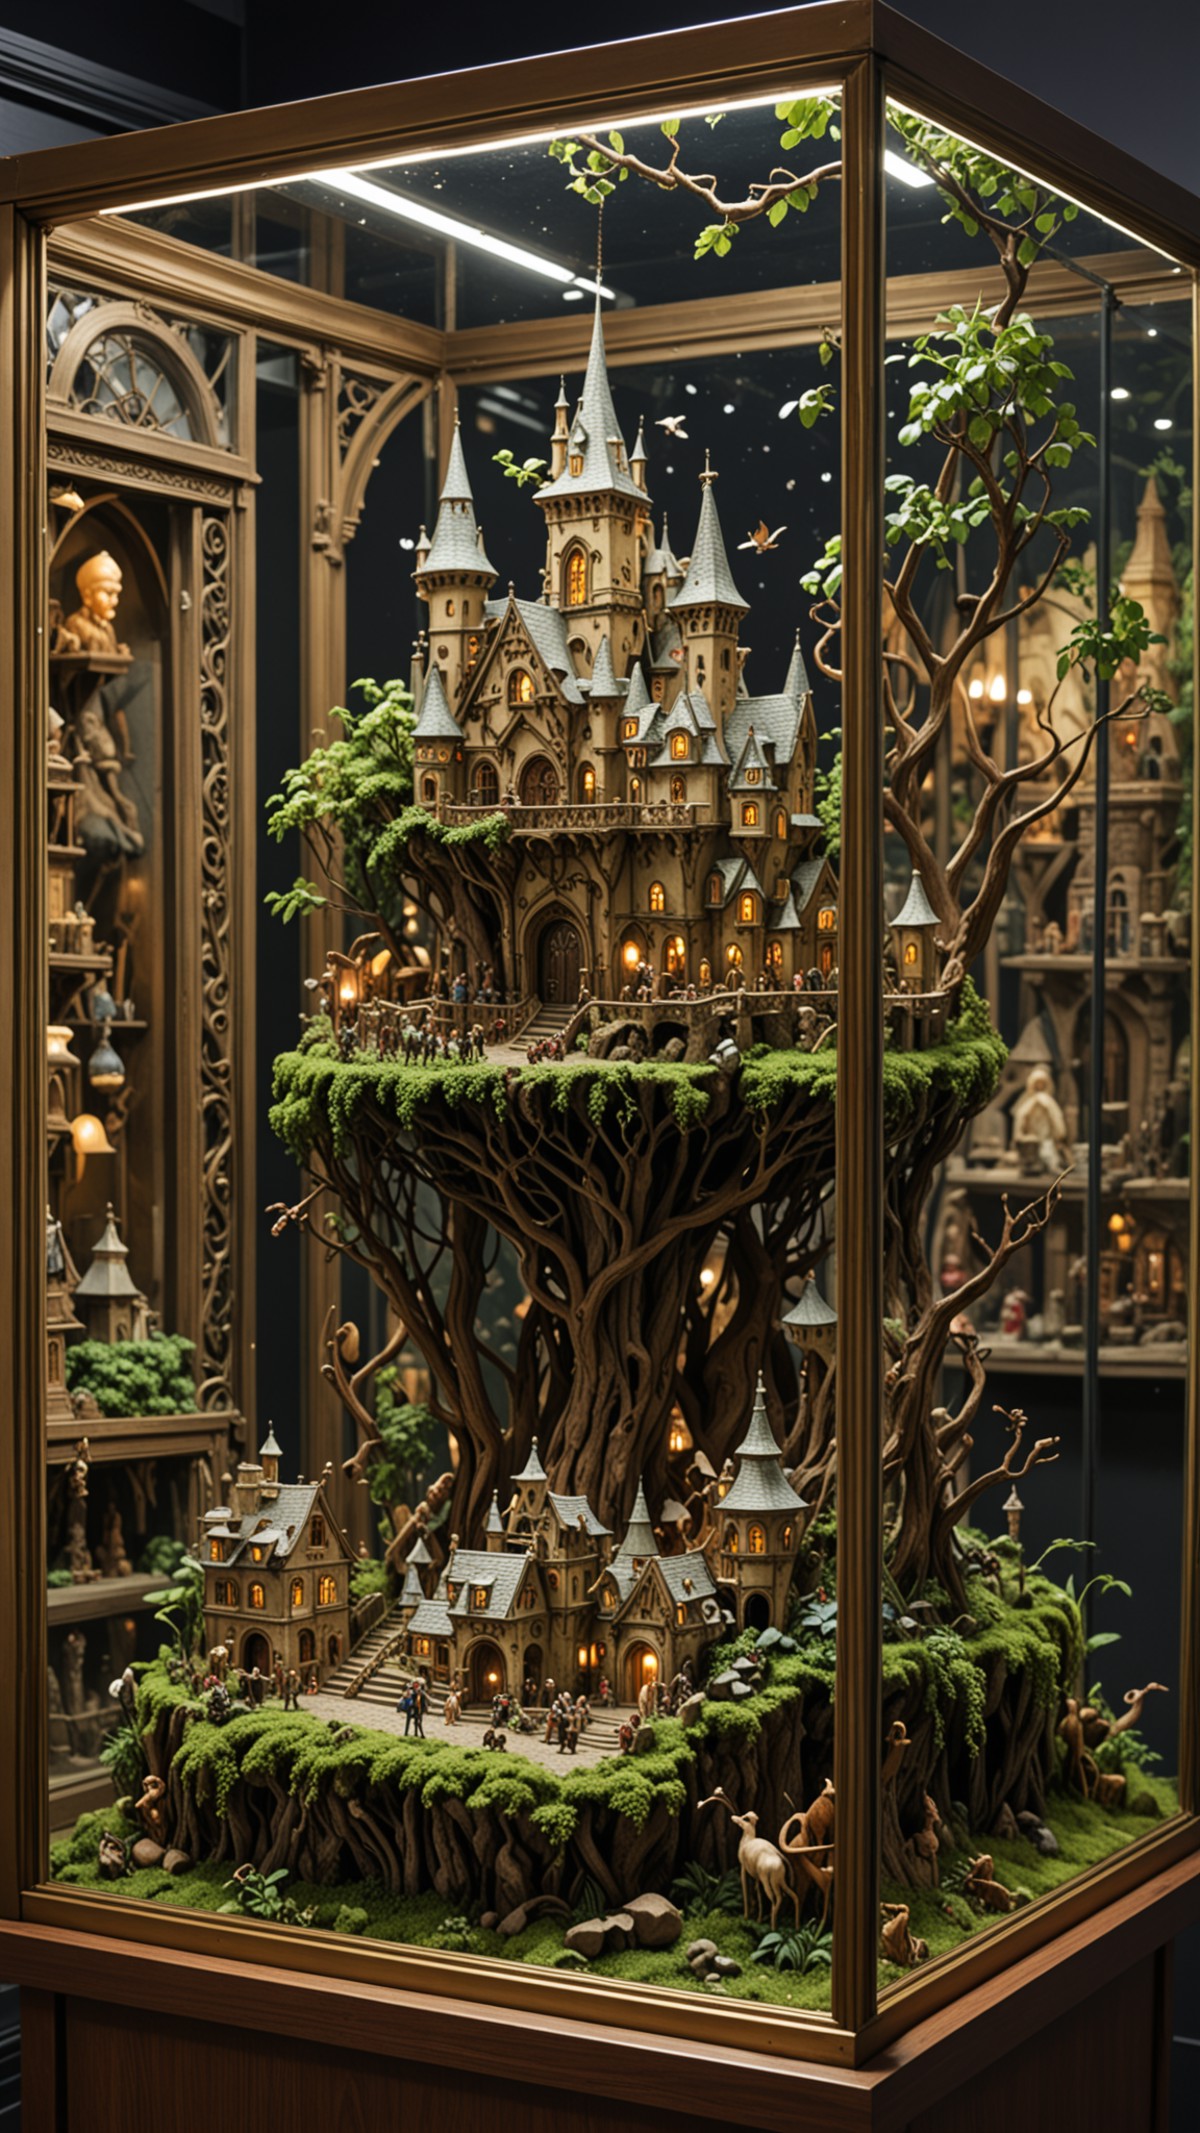 A truly enchanting and magical Ornament in a glass Box display unit, Stood in New York City, busy city street, winning pho...